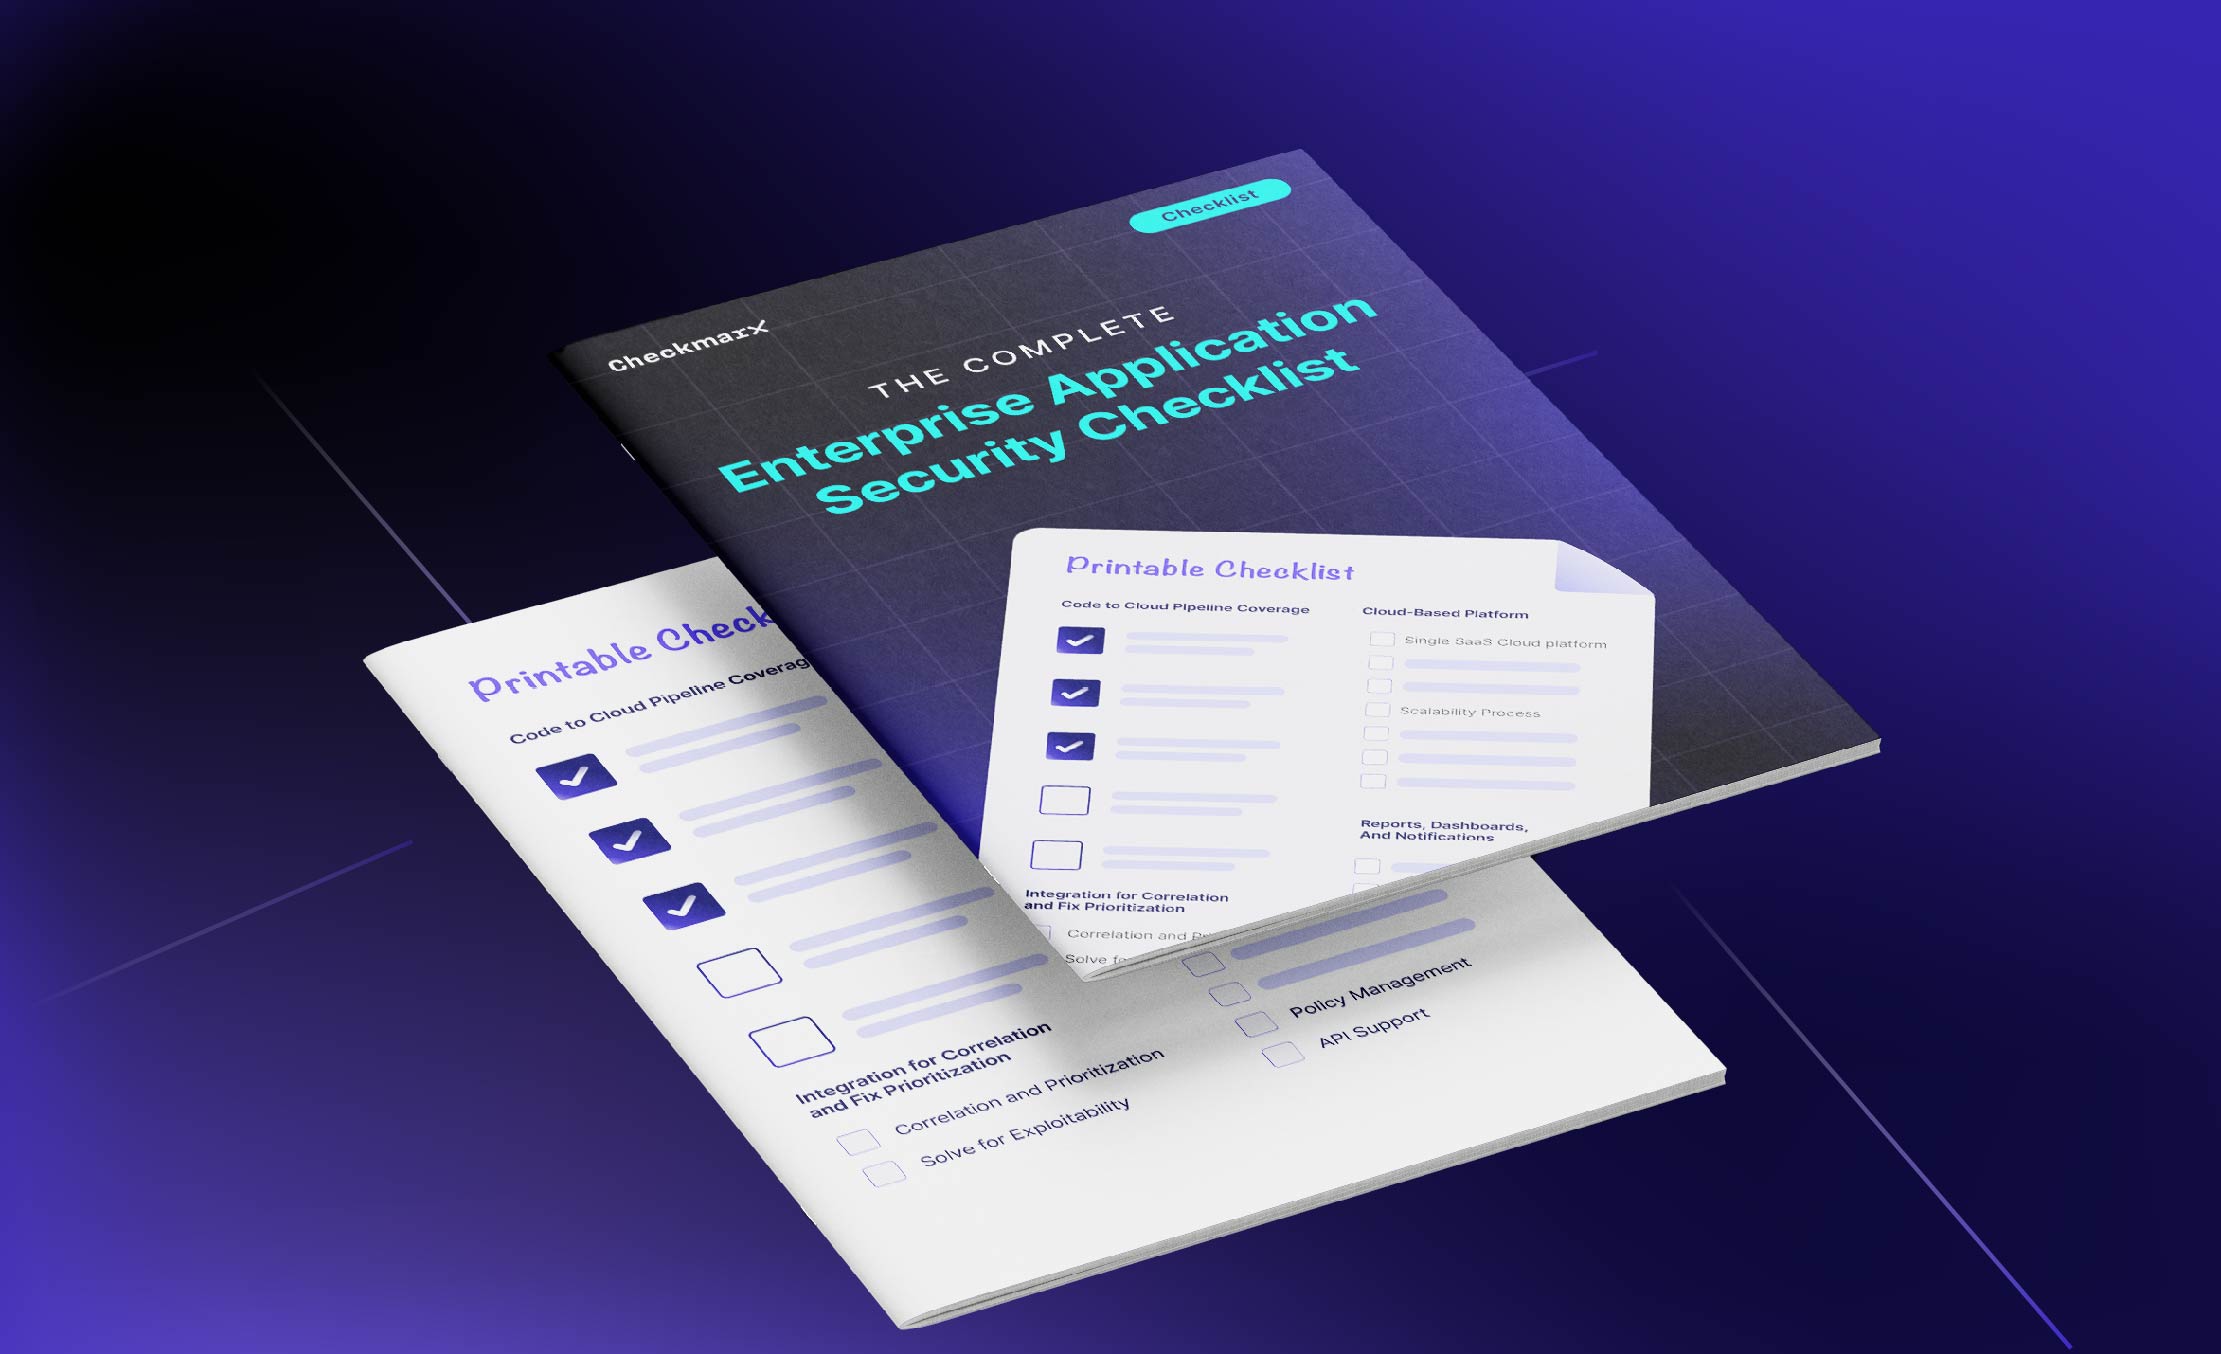 Checklist: The Complete Guide To Enterprise Application Security